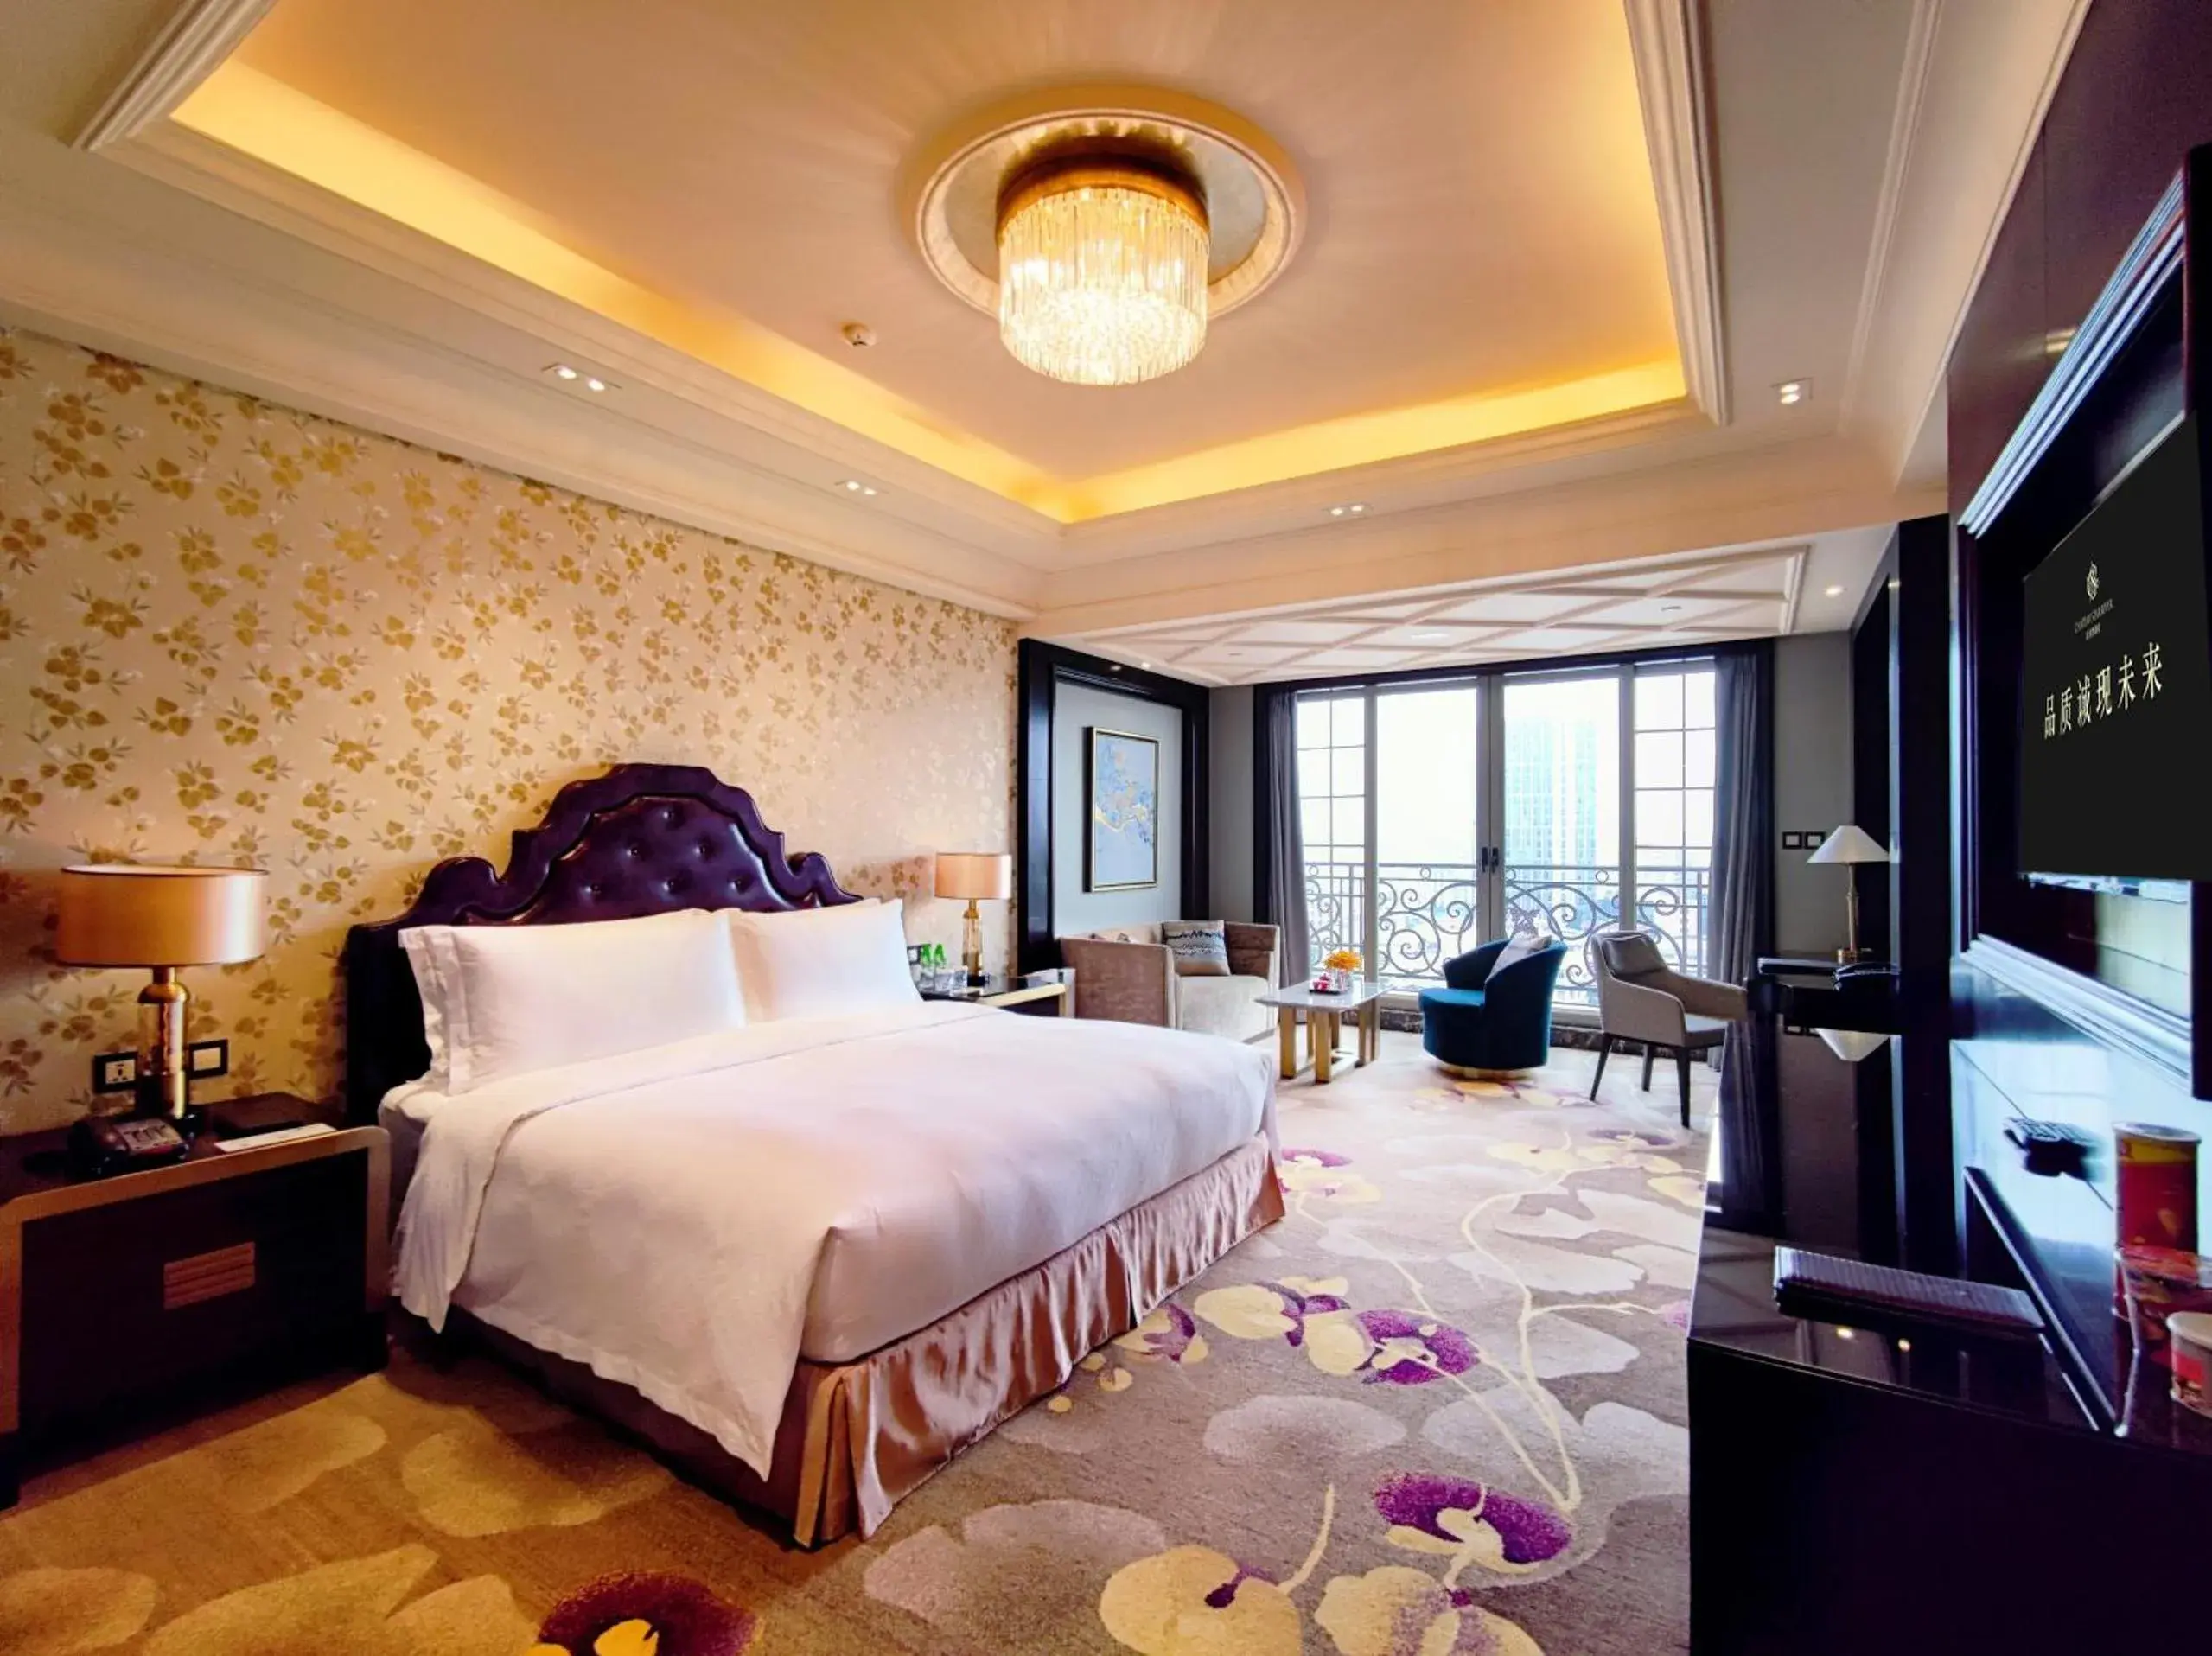 Photo of the whole room in Chateau Star River Guangzhou-Chateau Star River Guangzhou-Trade Fair Shuttle Bus